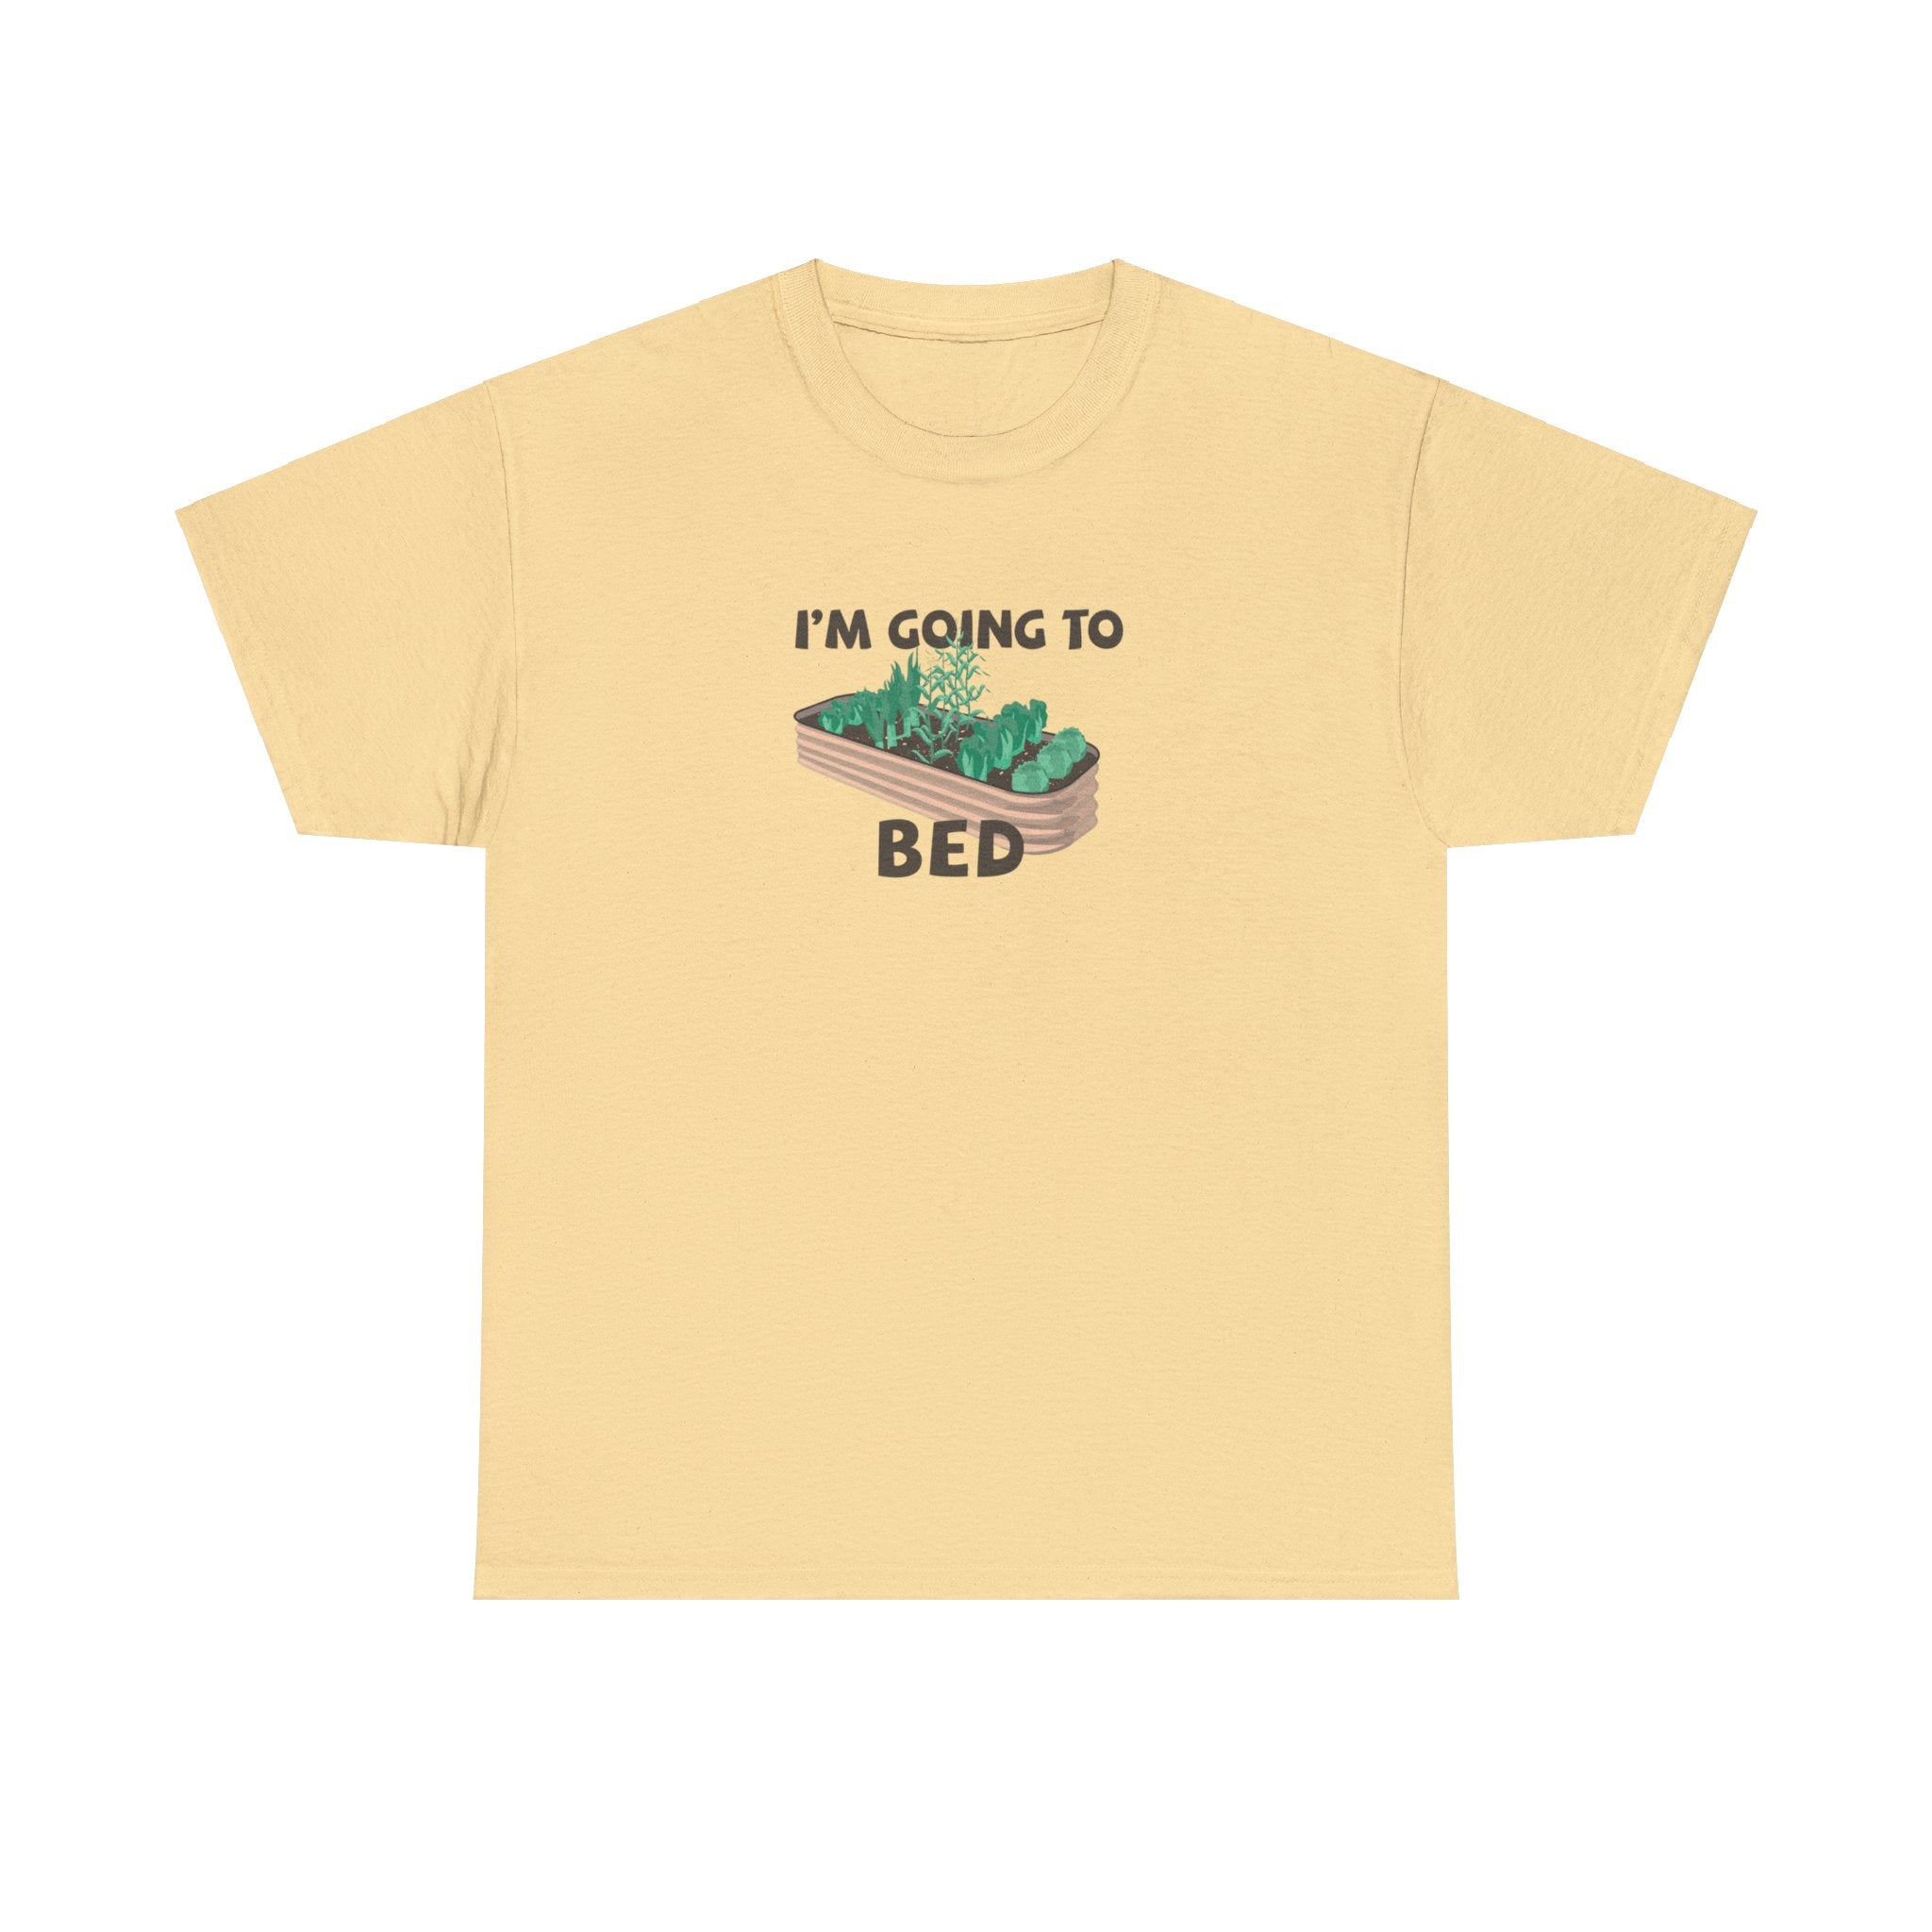 I'm going to bed (metal) T-shirt